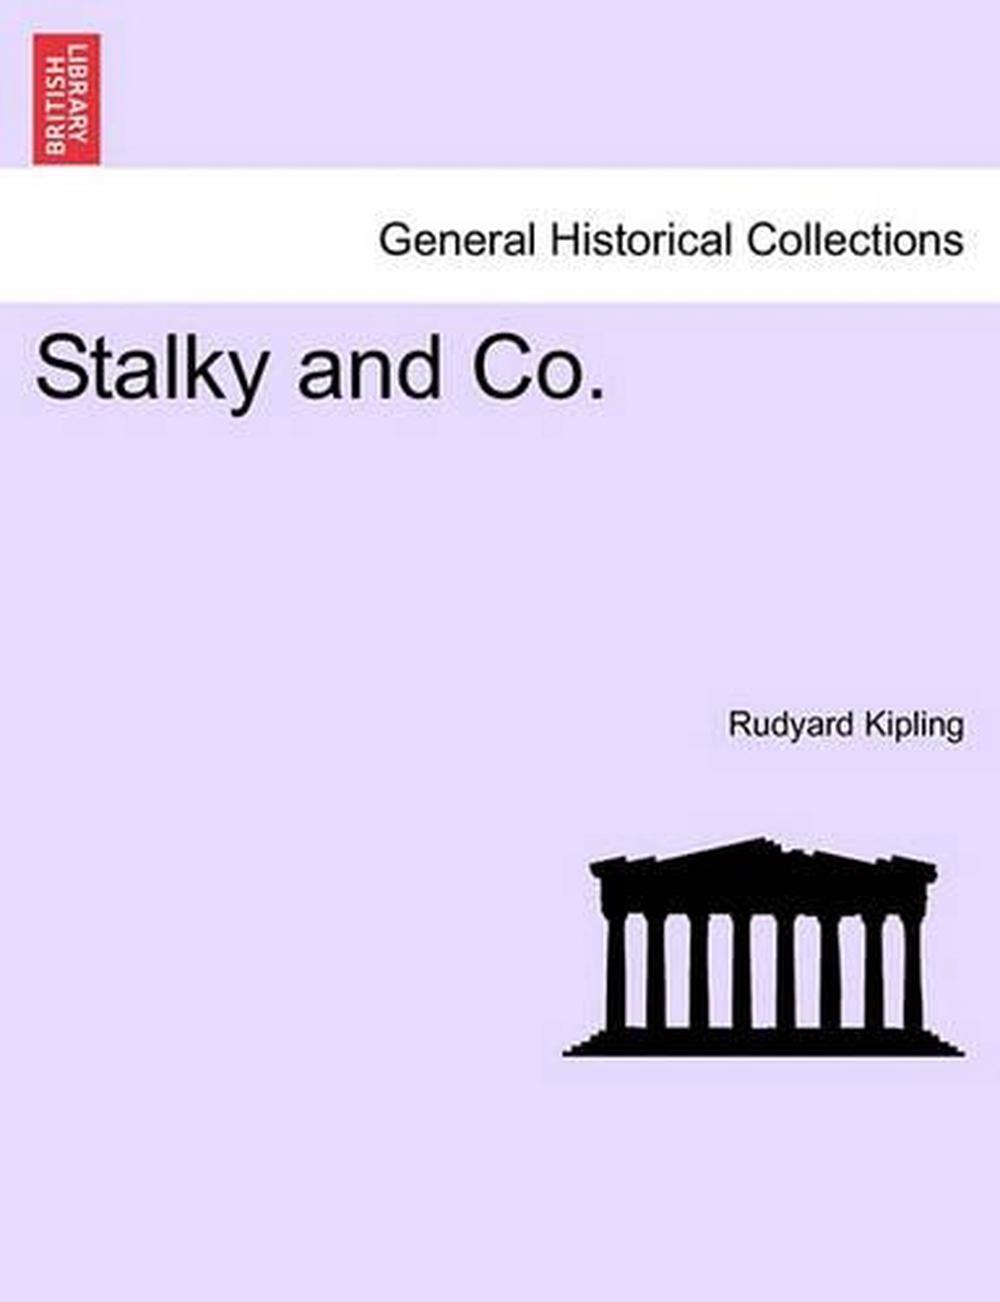 kipling stalky and co